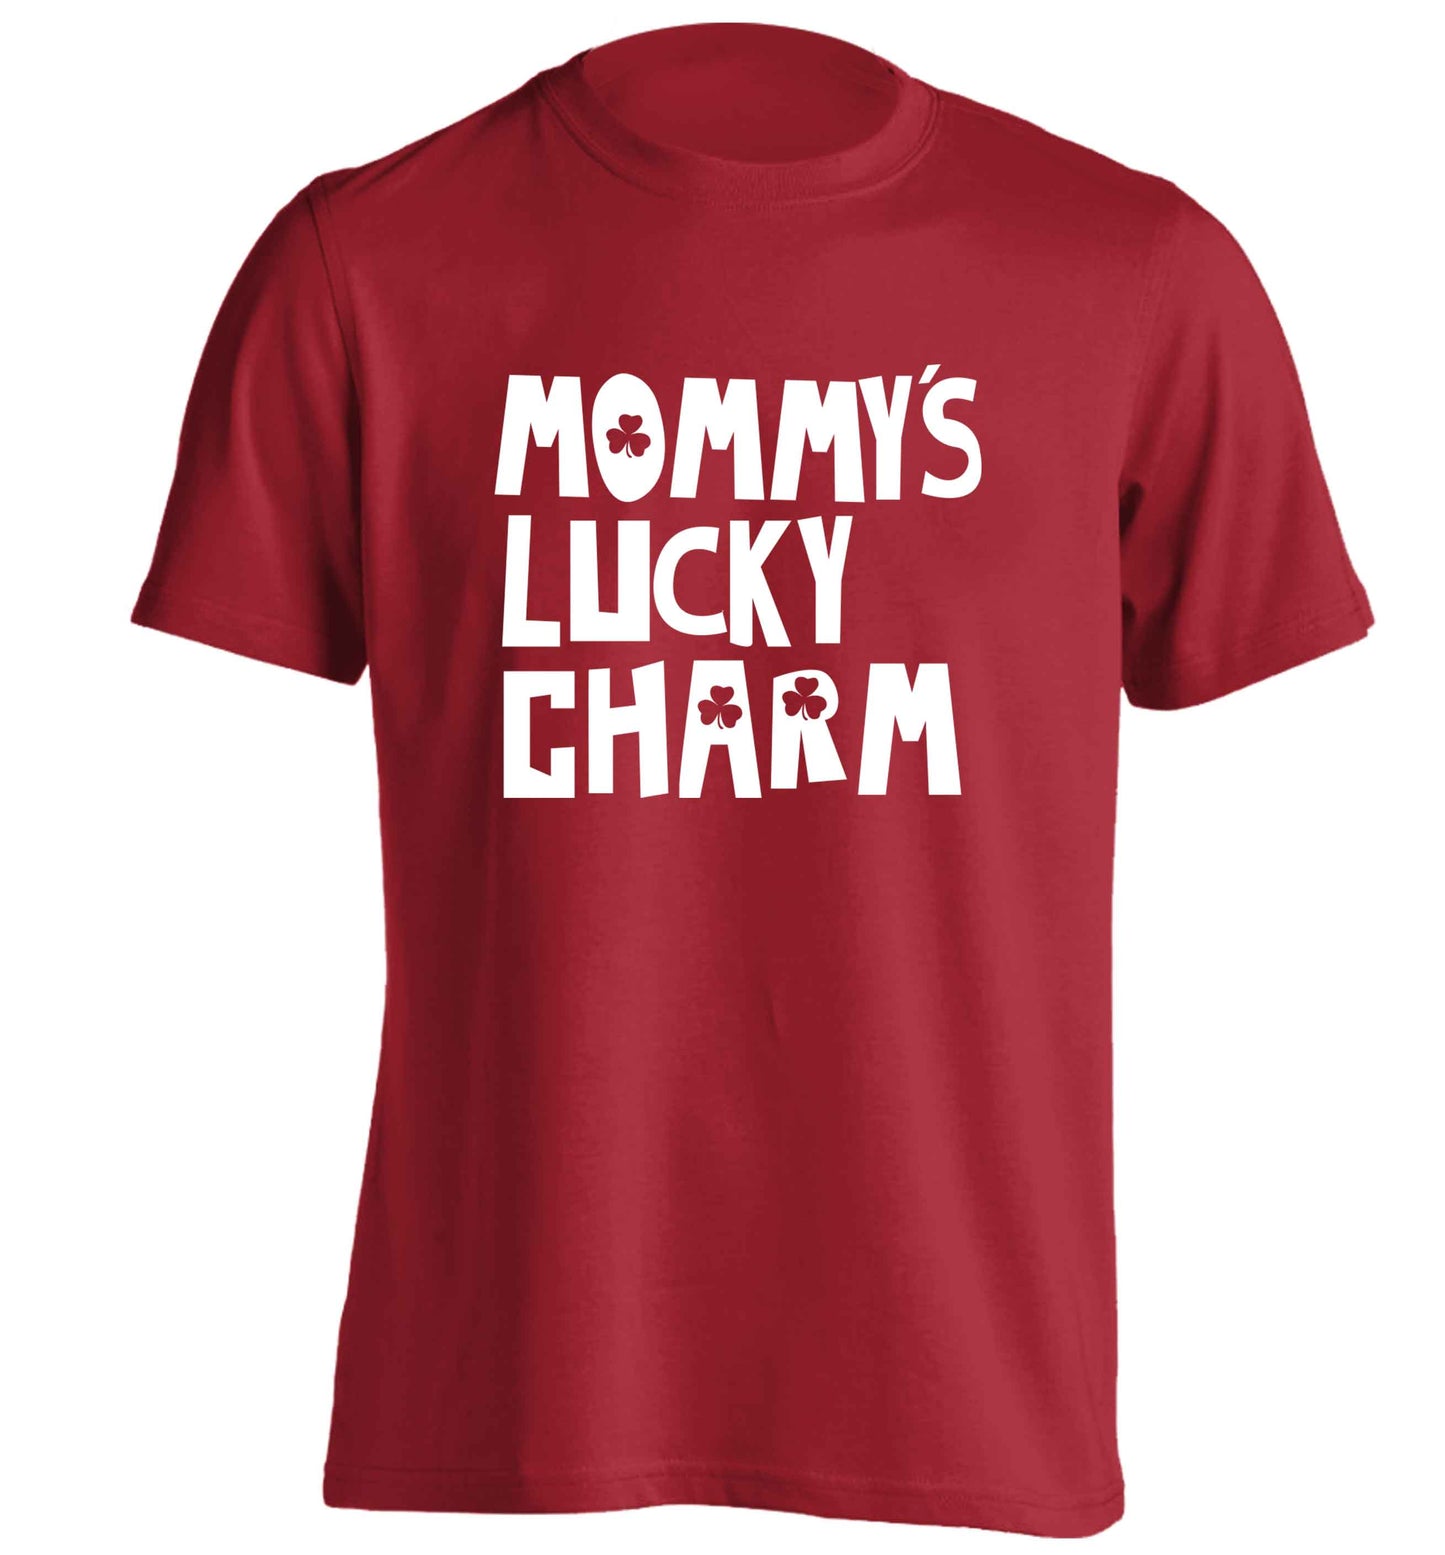 Mommy's lucky charm adults unisex red Tshirt 2XL